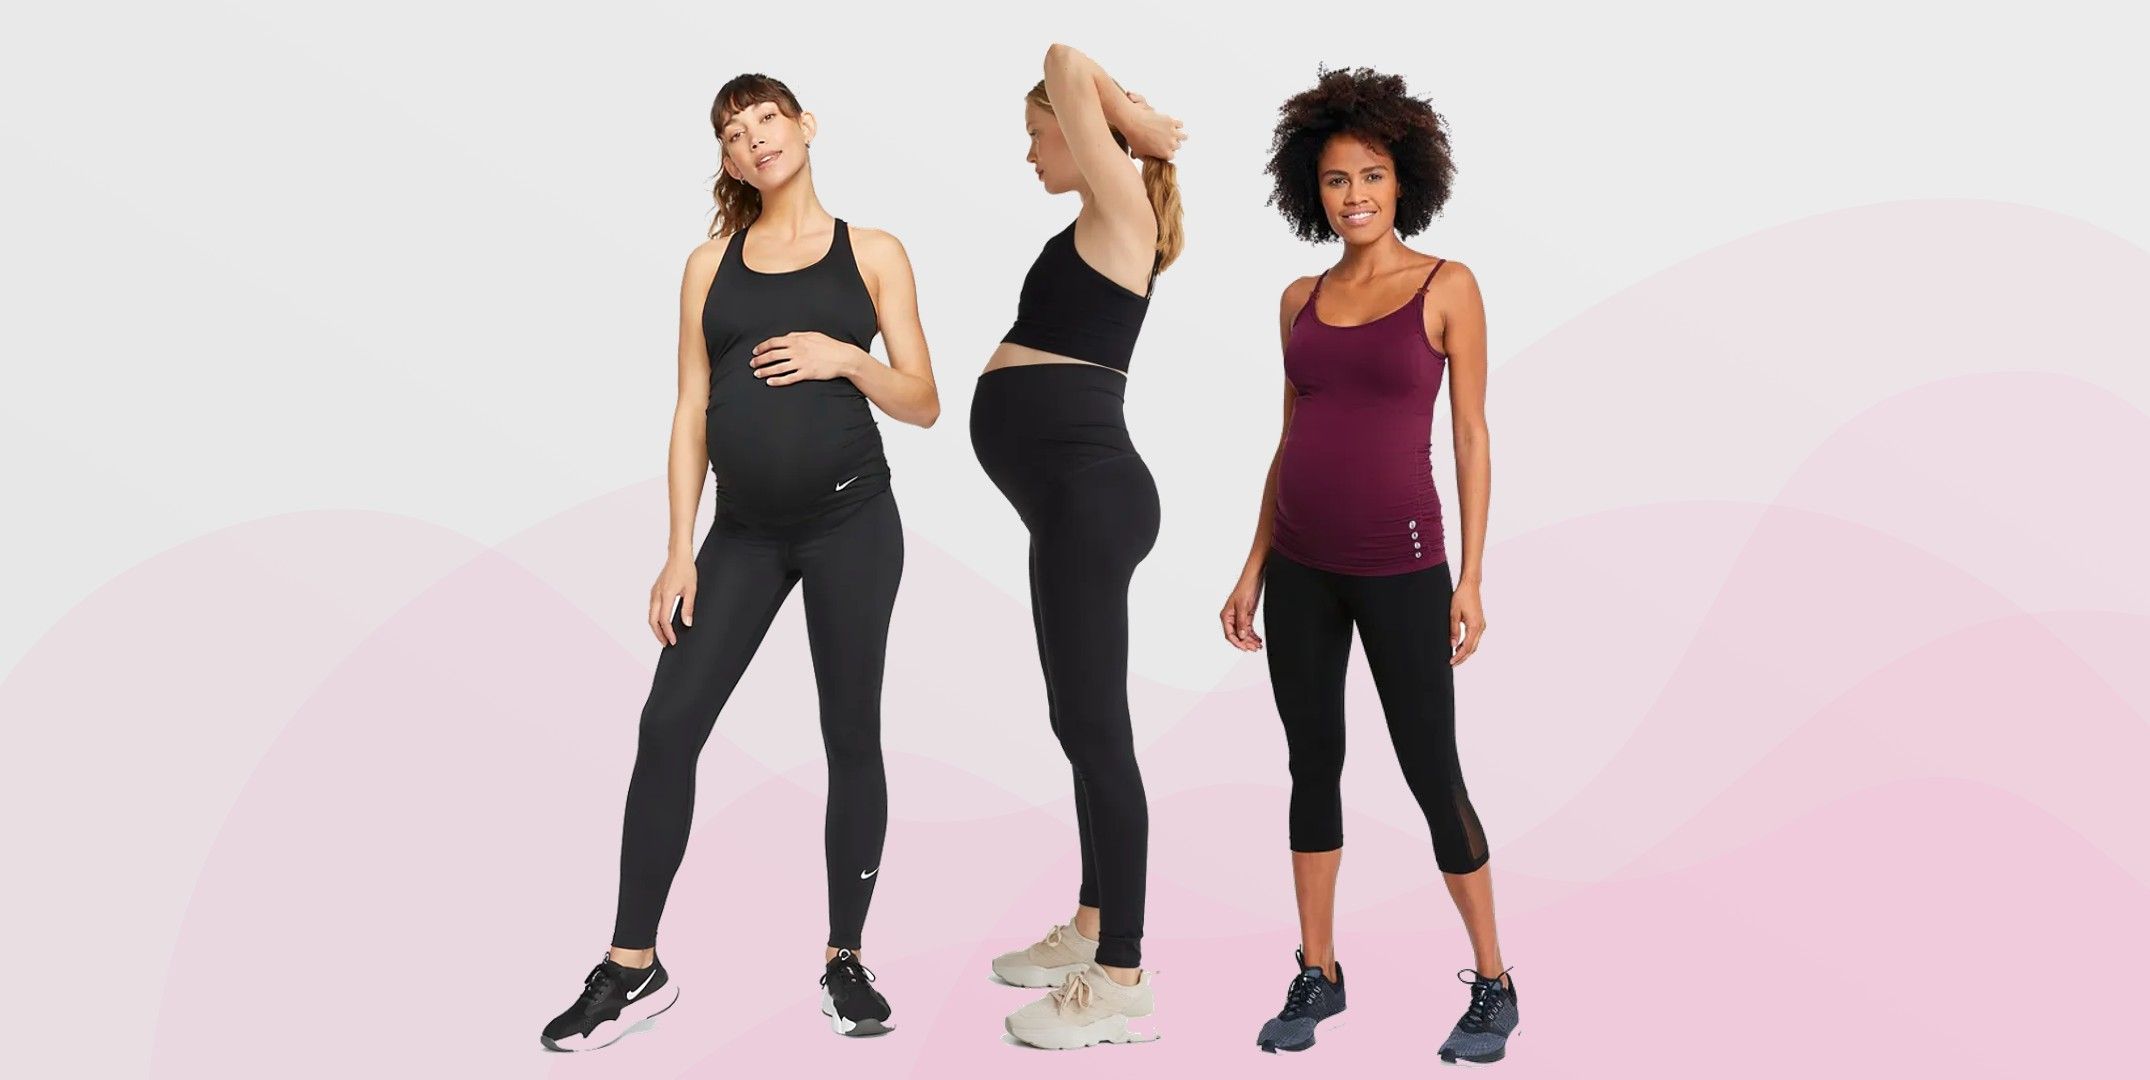 Best maternity sportswear brands: Clothes to keep active during pregnancy